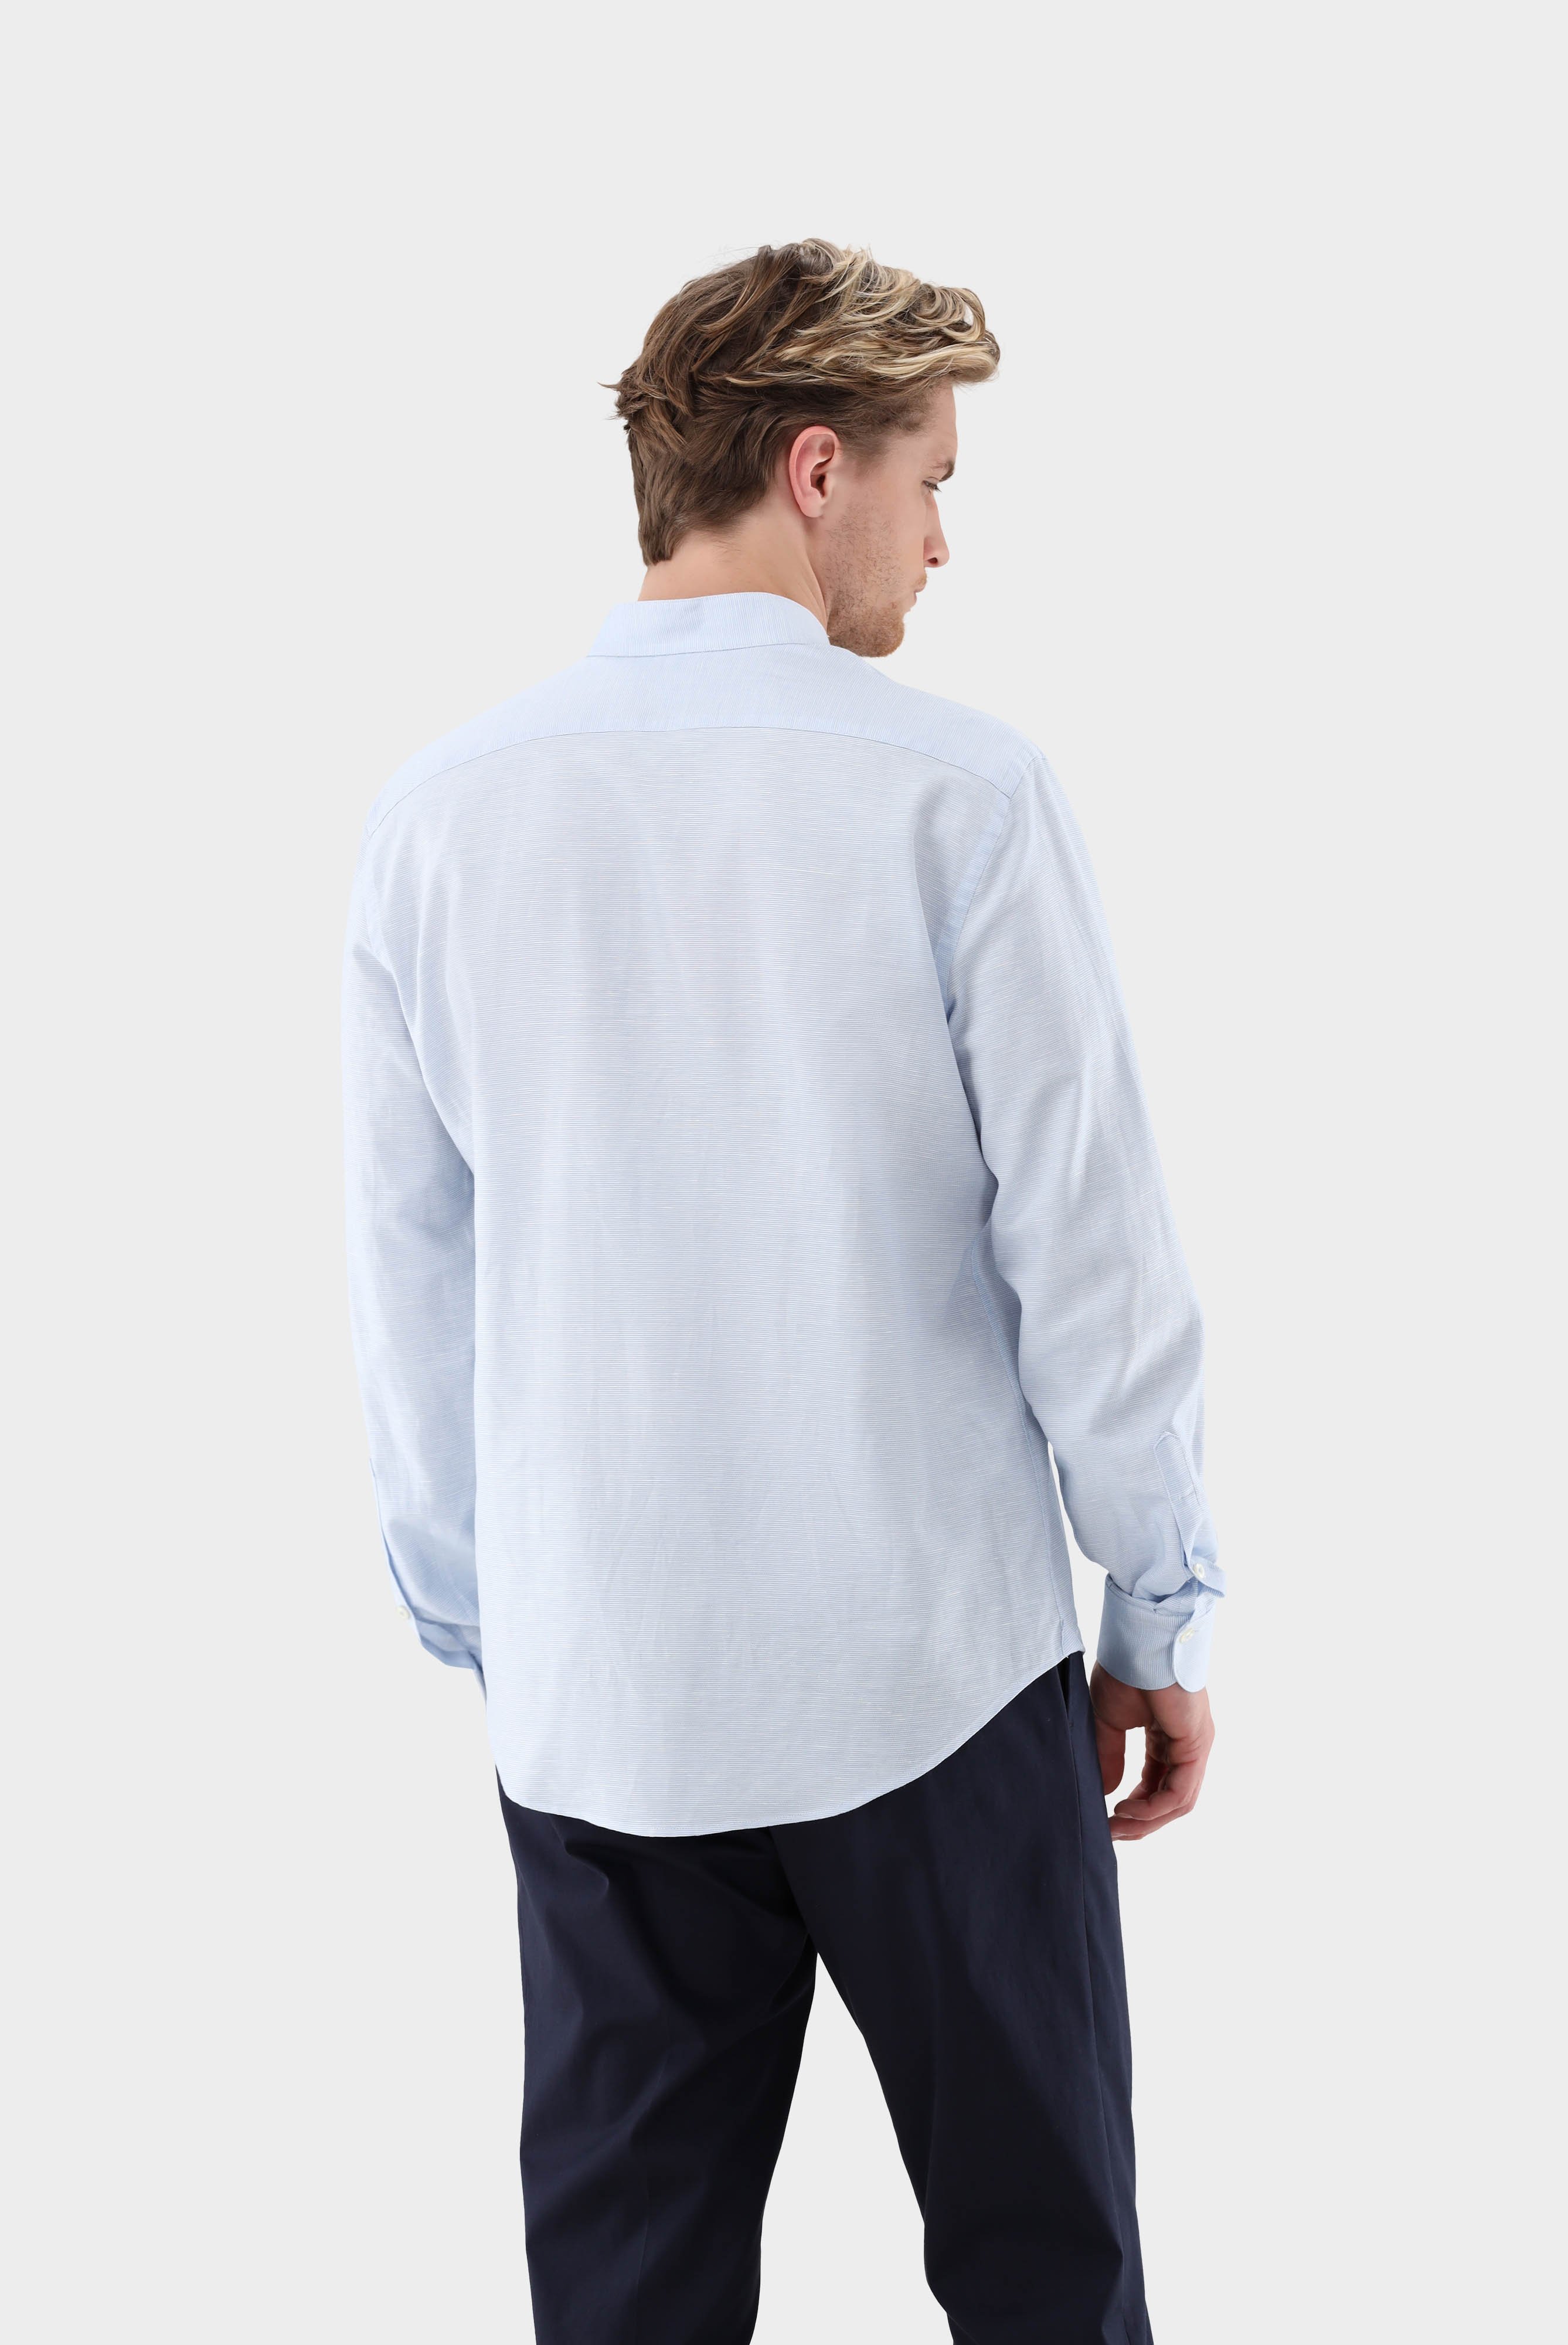 Casual Shirts+Structured stand-up collar shirt made of cotton and linen+20.2073.AV.150302.720.S